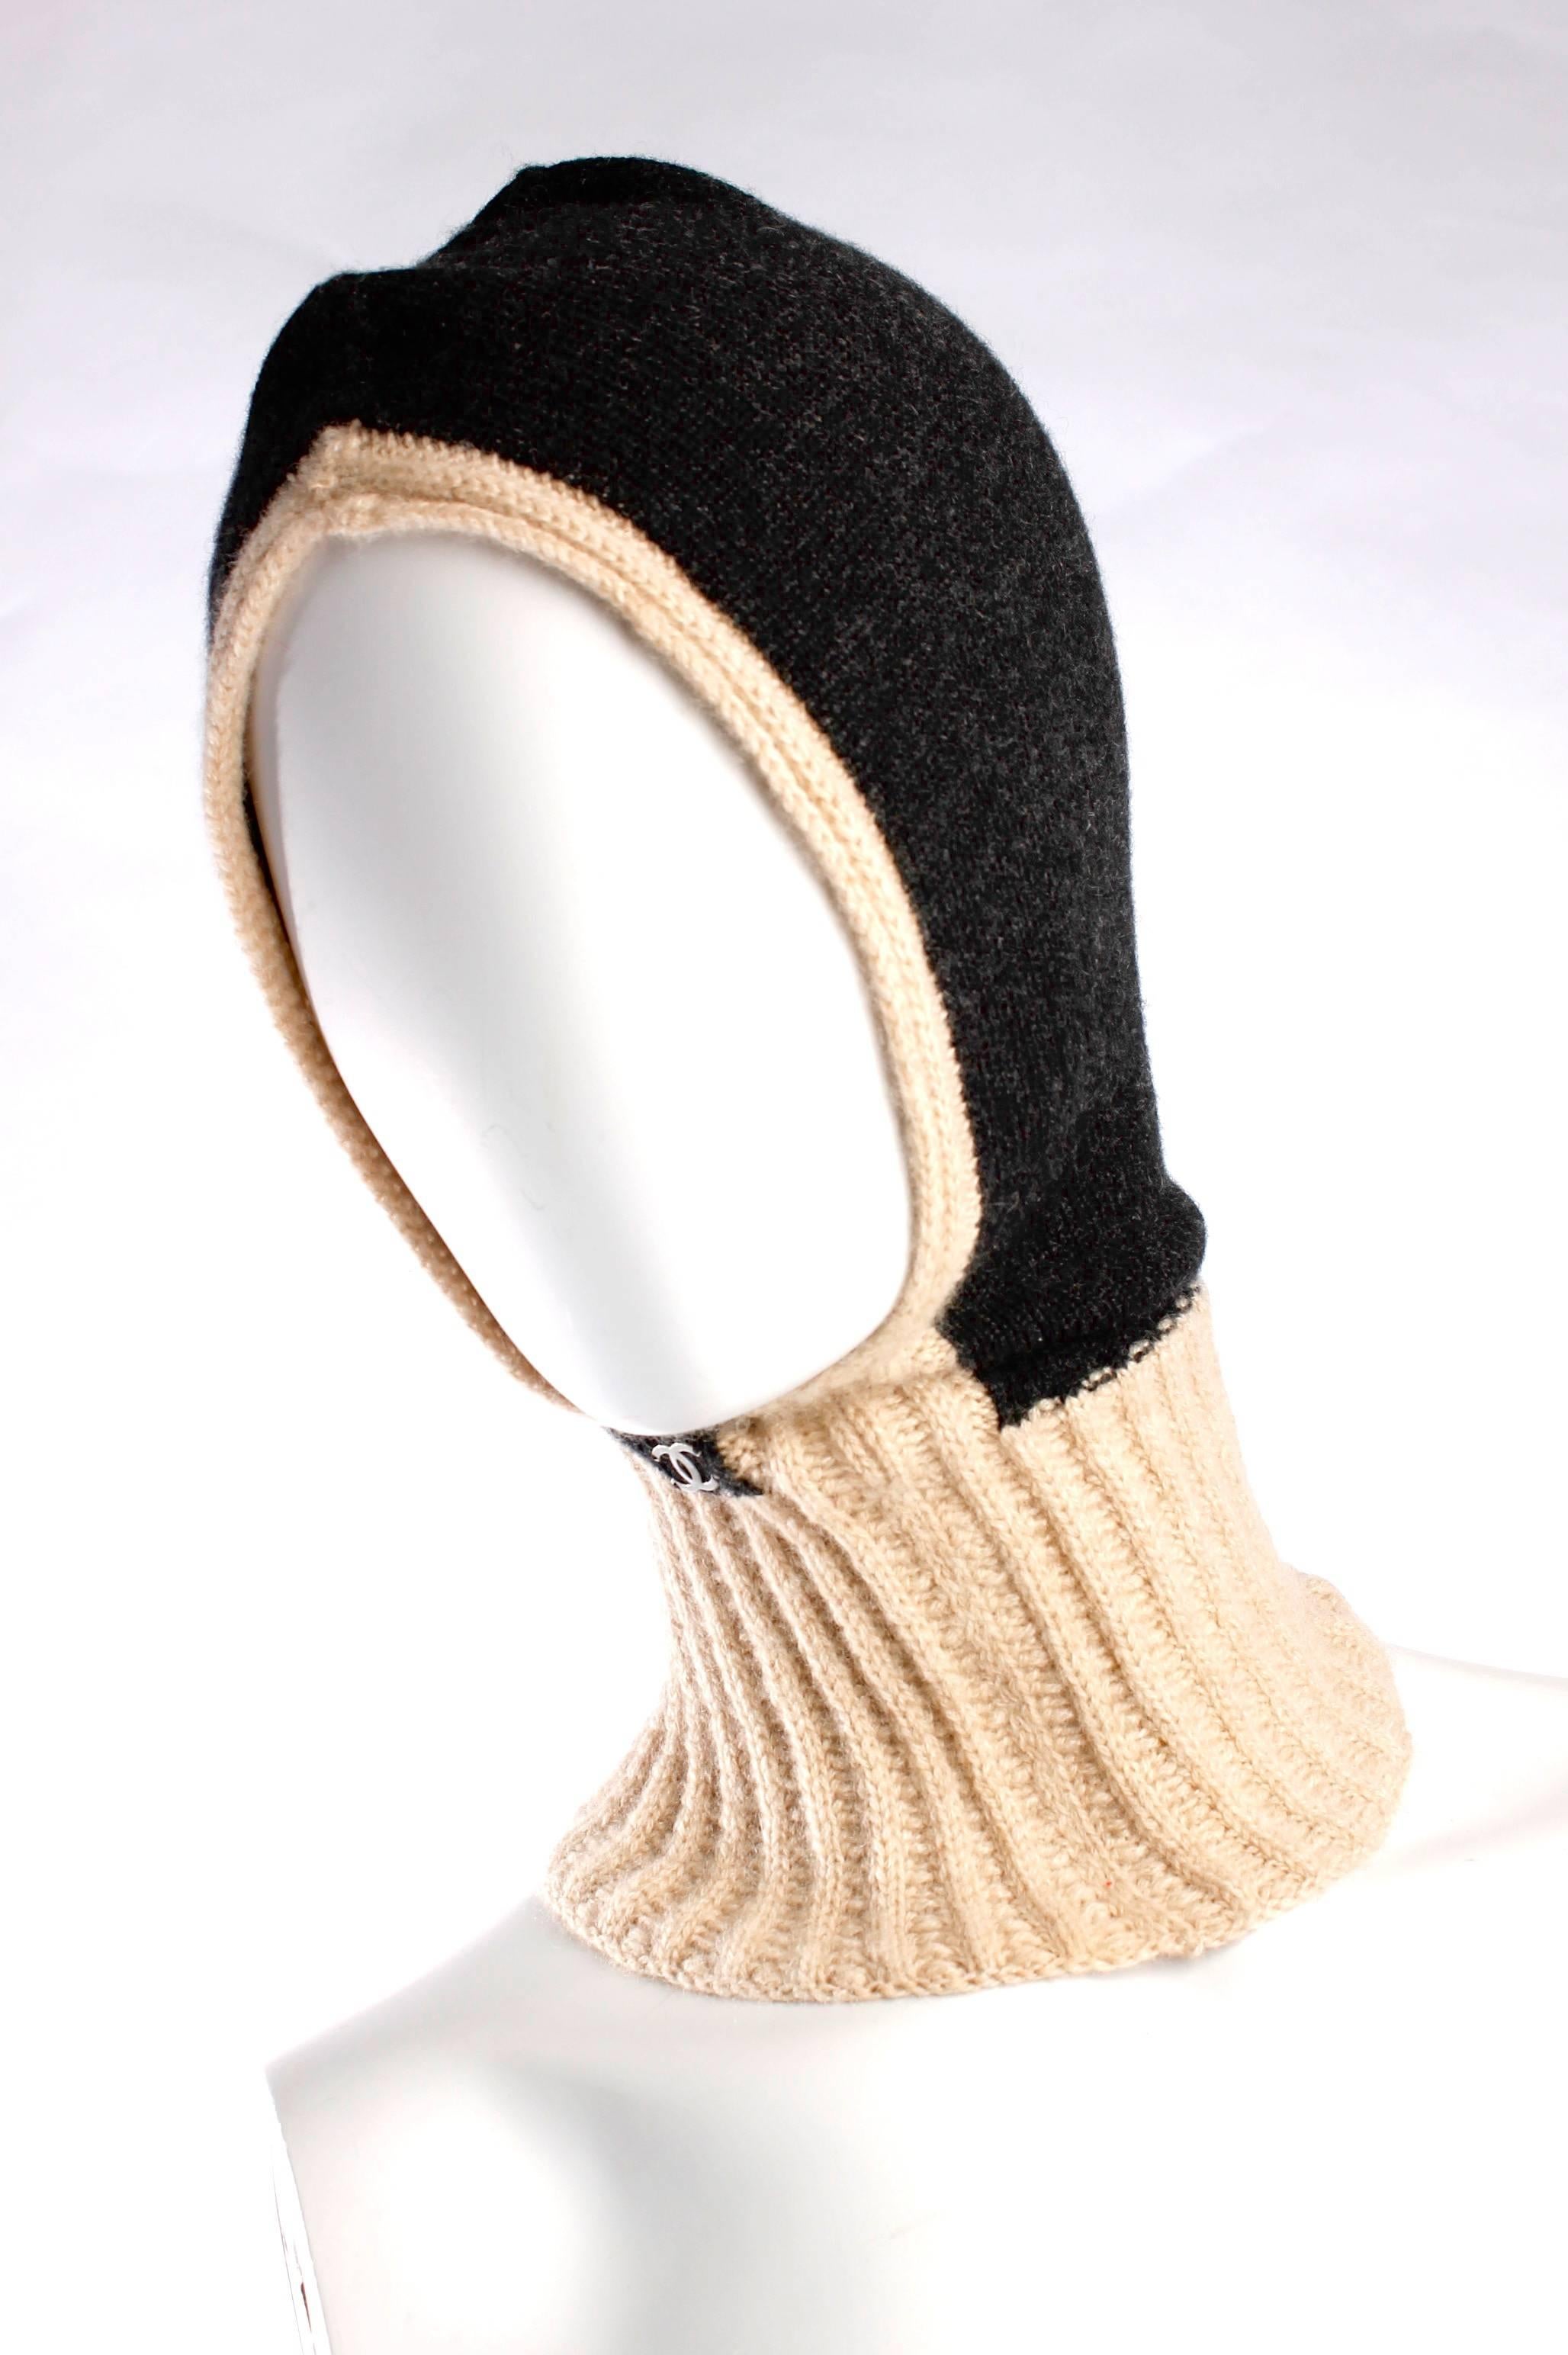 Fancy and warm! Chanel cashmere hat in dark grey and beige, this is also called a balaclava.

The hat is in dark grey, the collar and trimming in beige. On the right side a litlle metal CC-logo in grey.

New and never been worn, comes with it